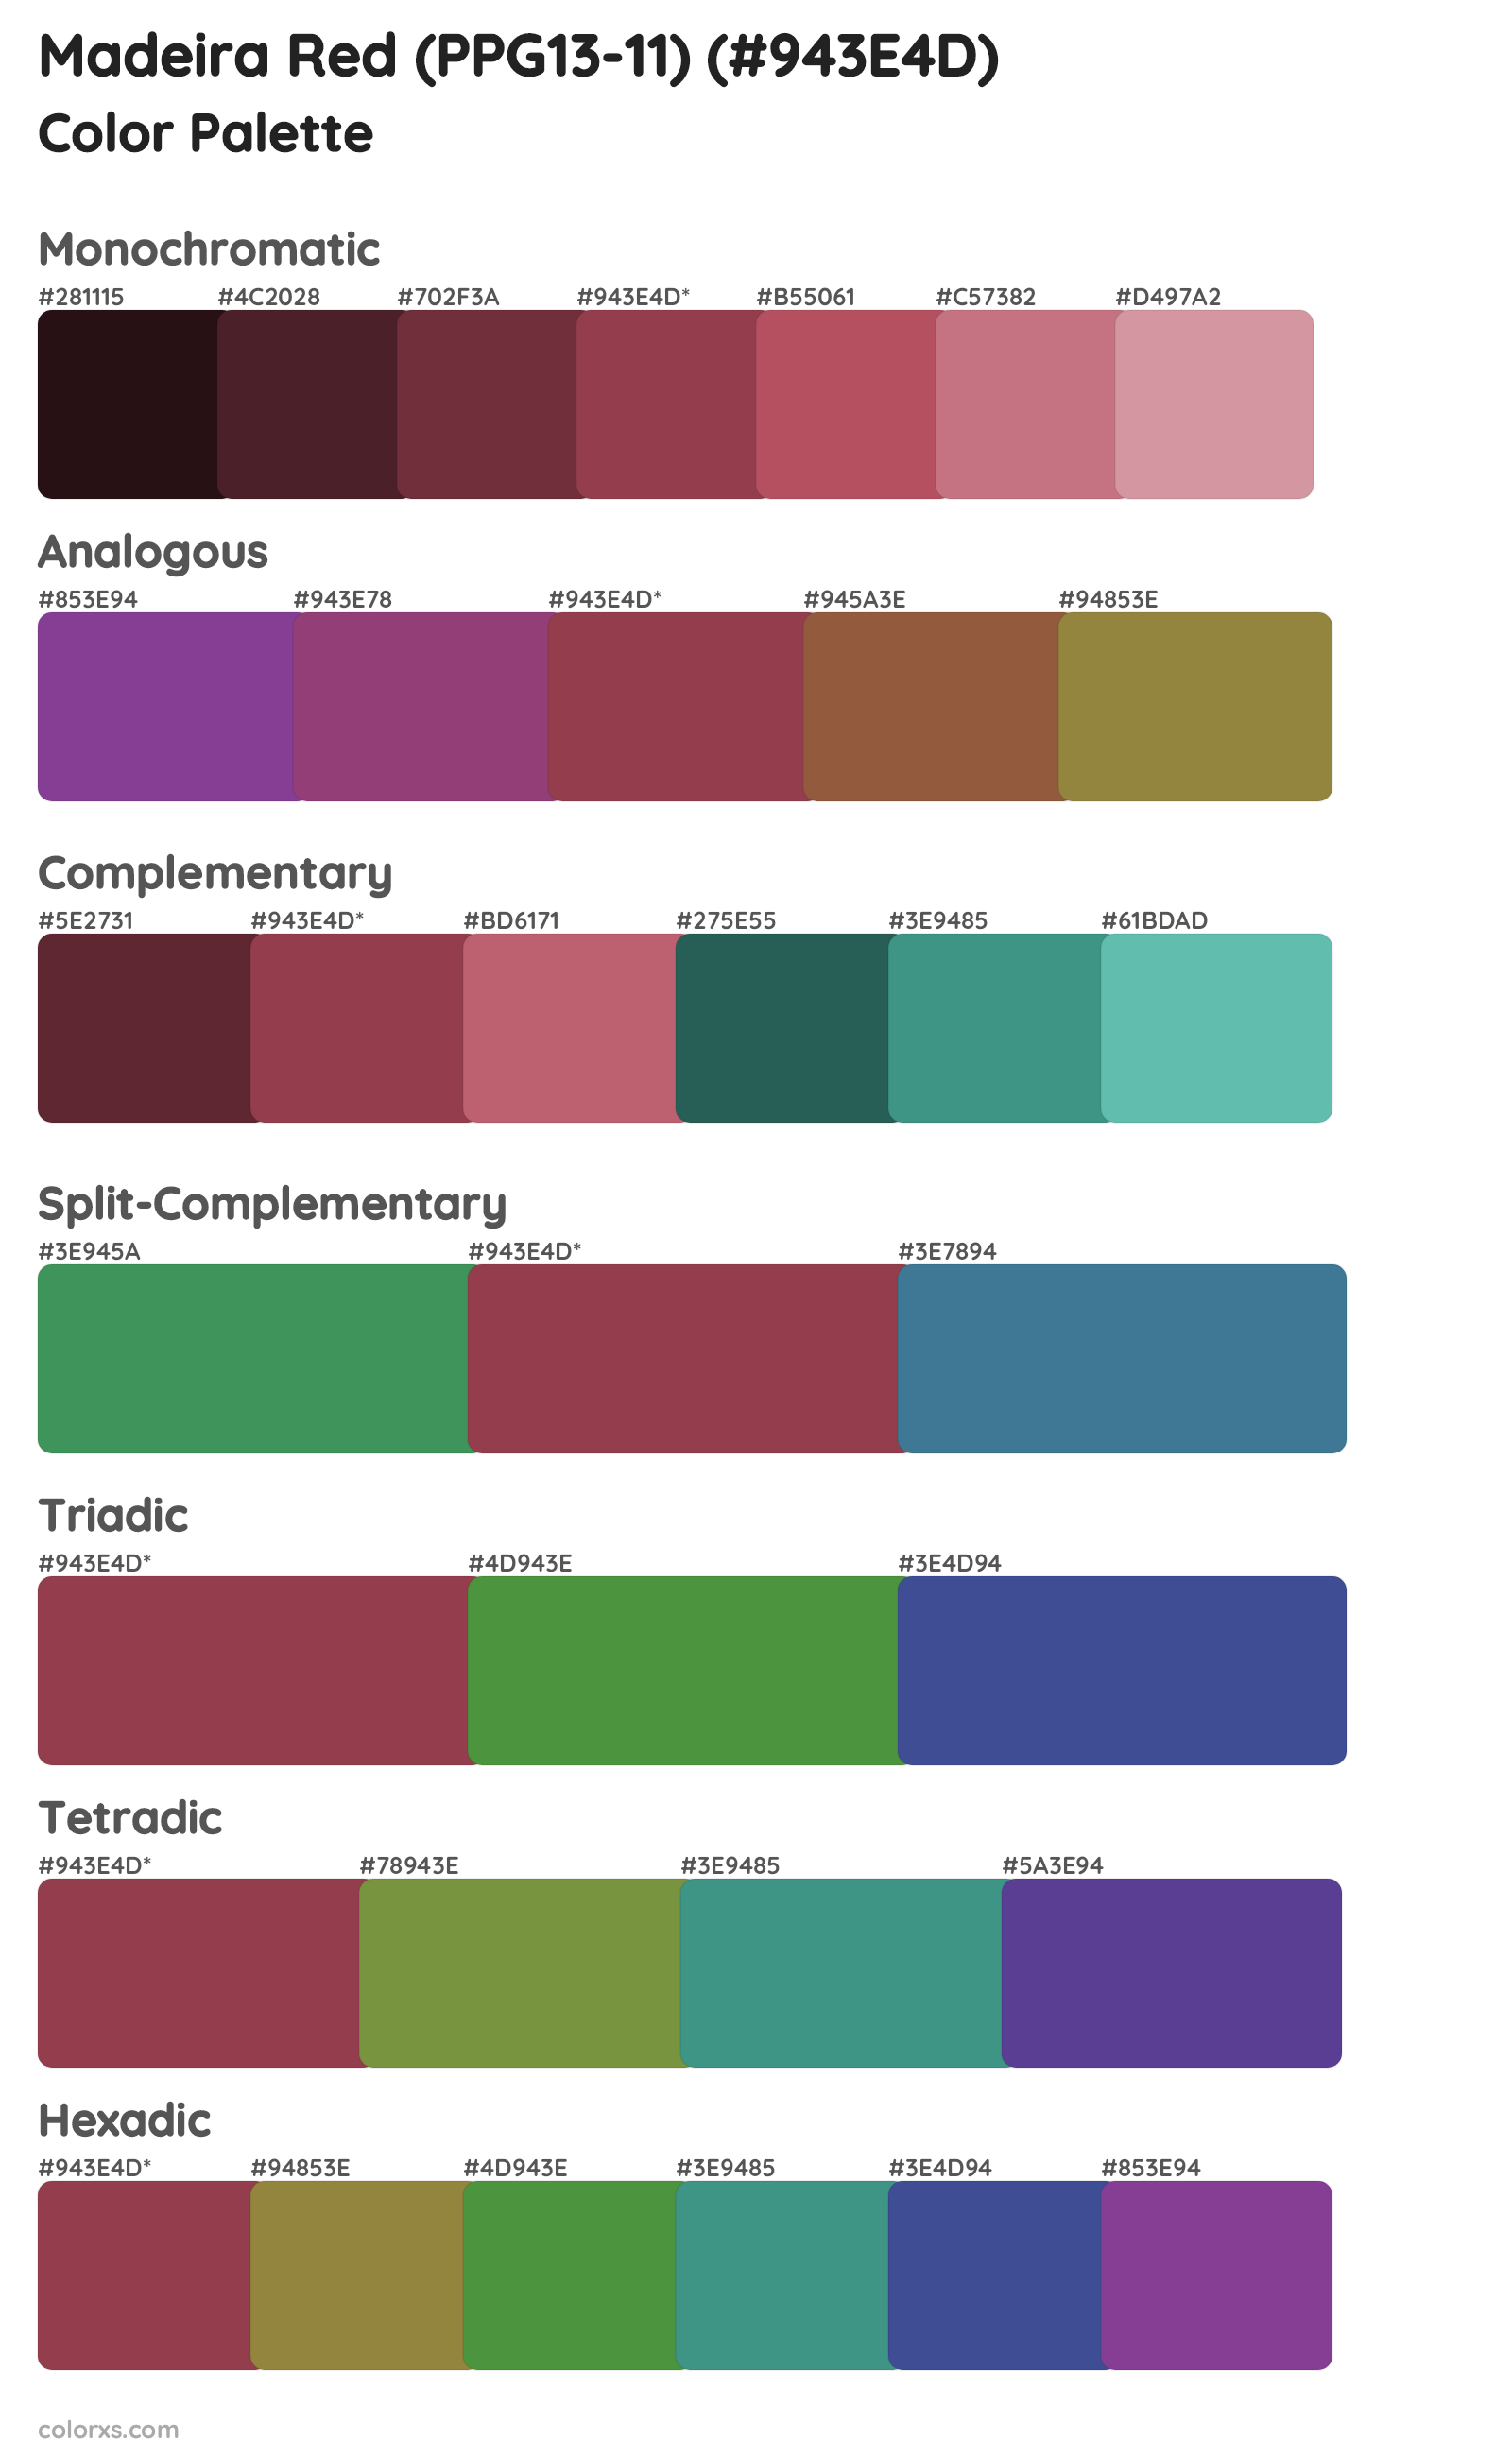 Madeira Red (PPG13-11) Color Scheme Palettes